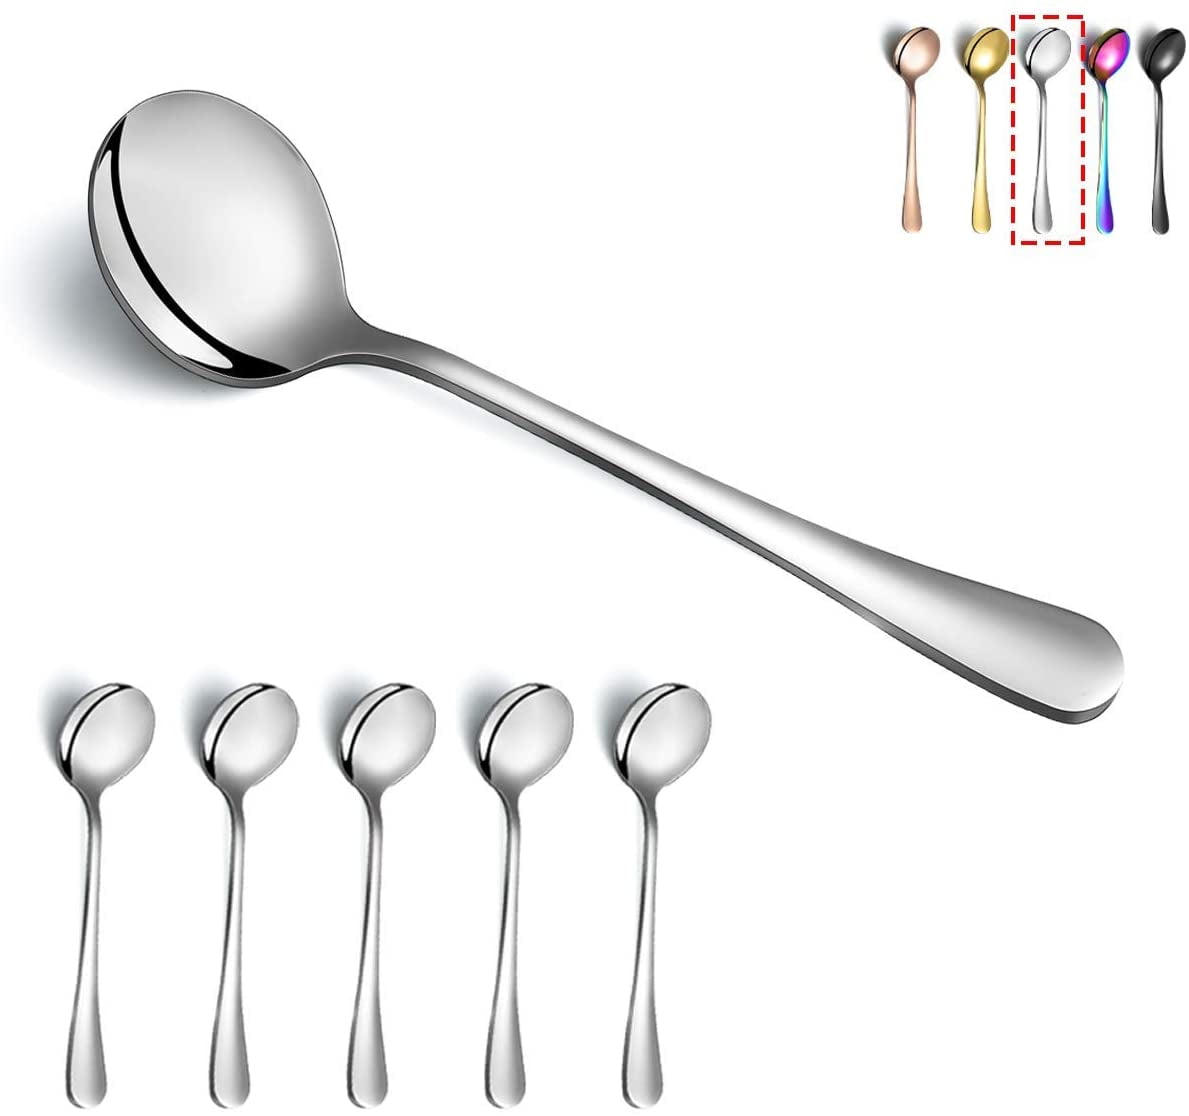 BESTONZON Spoon Large Stainless Steel Serving Spoon for Canning Ice Cream Coffee Tea Gold Large 